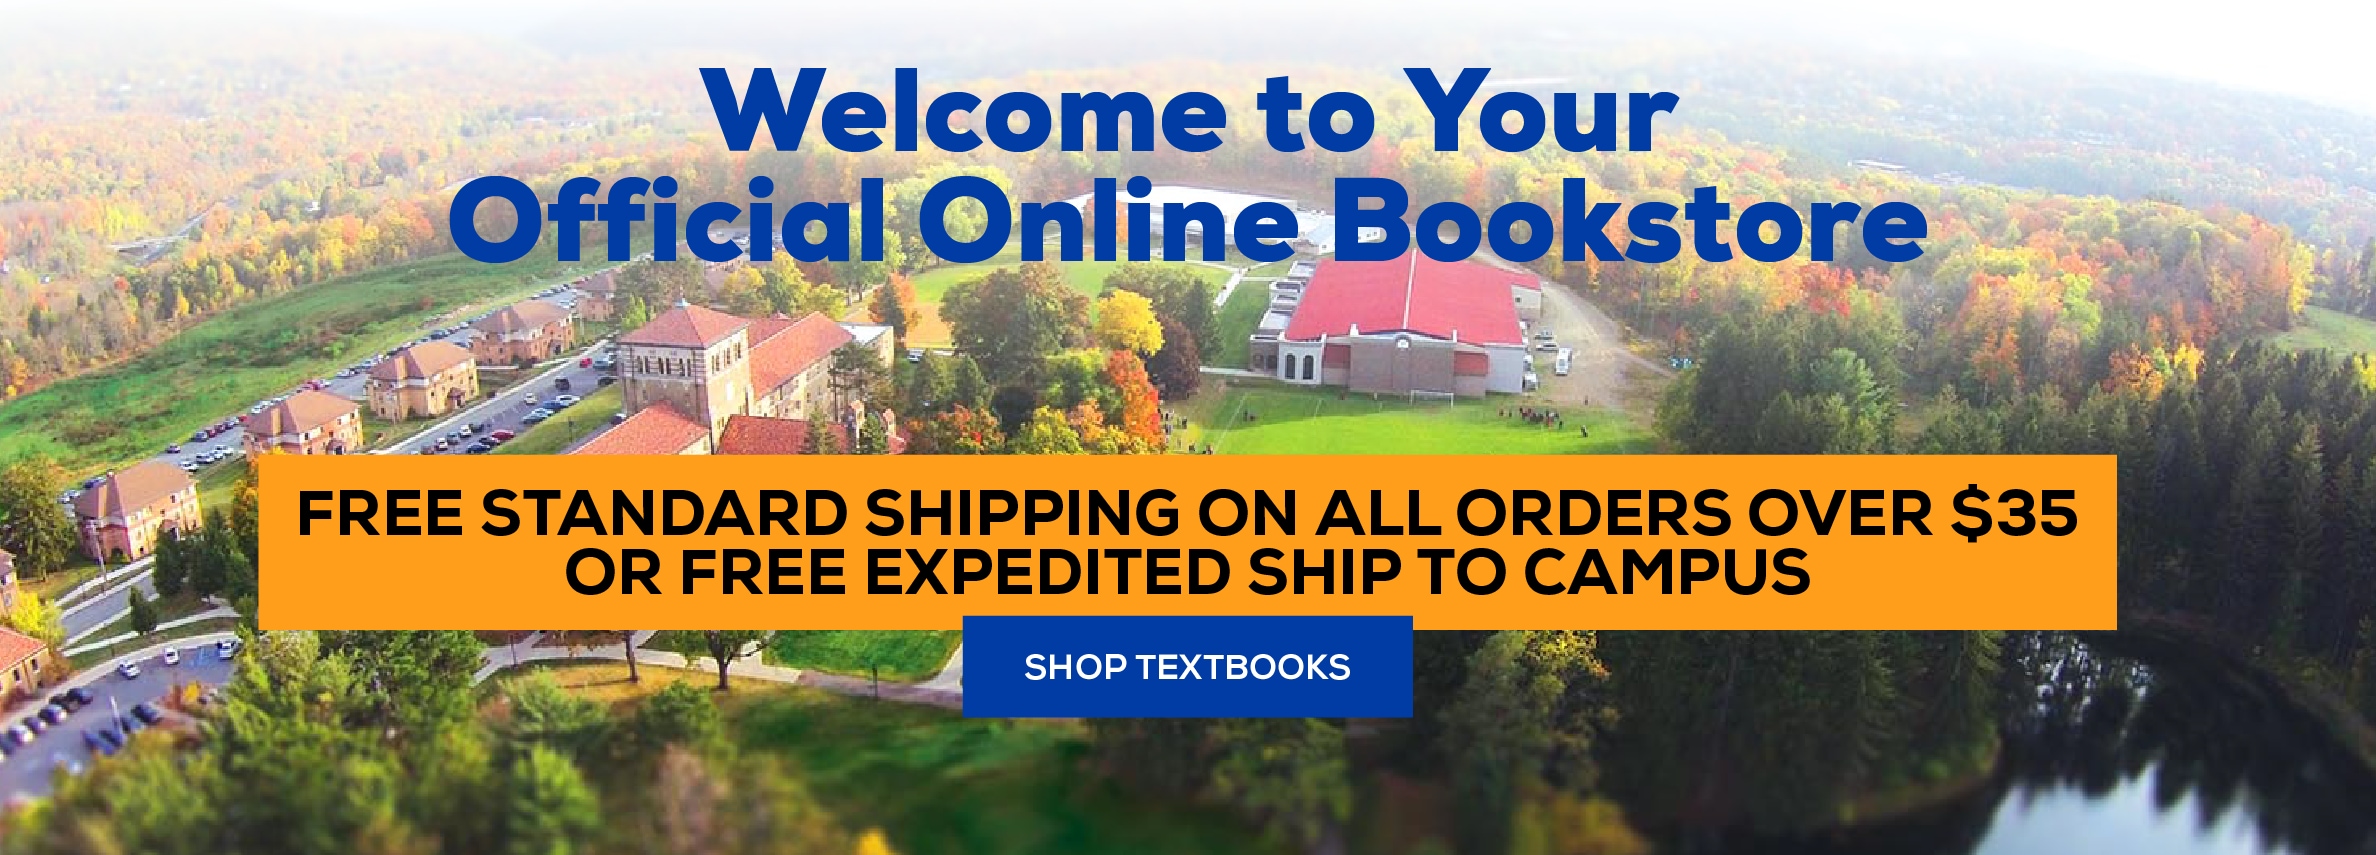 Welcome to your official online bookstore. Free Standard shipping on all orders over $35 or free Expedited Ship to Campus. Shop Textbooks